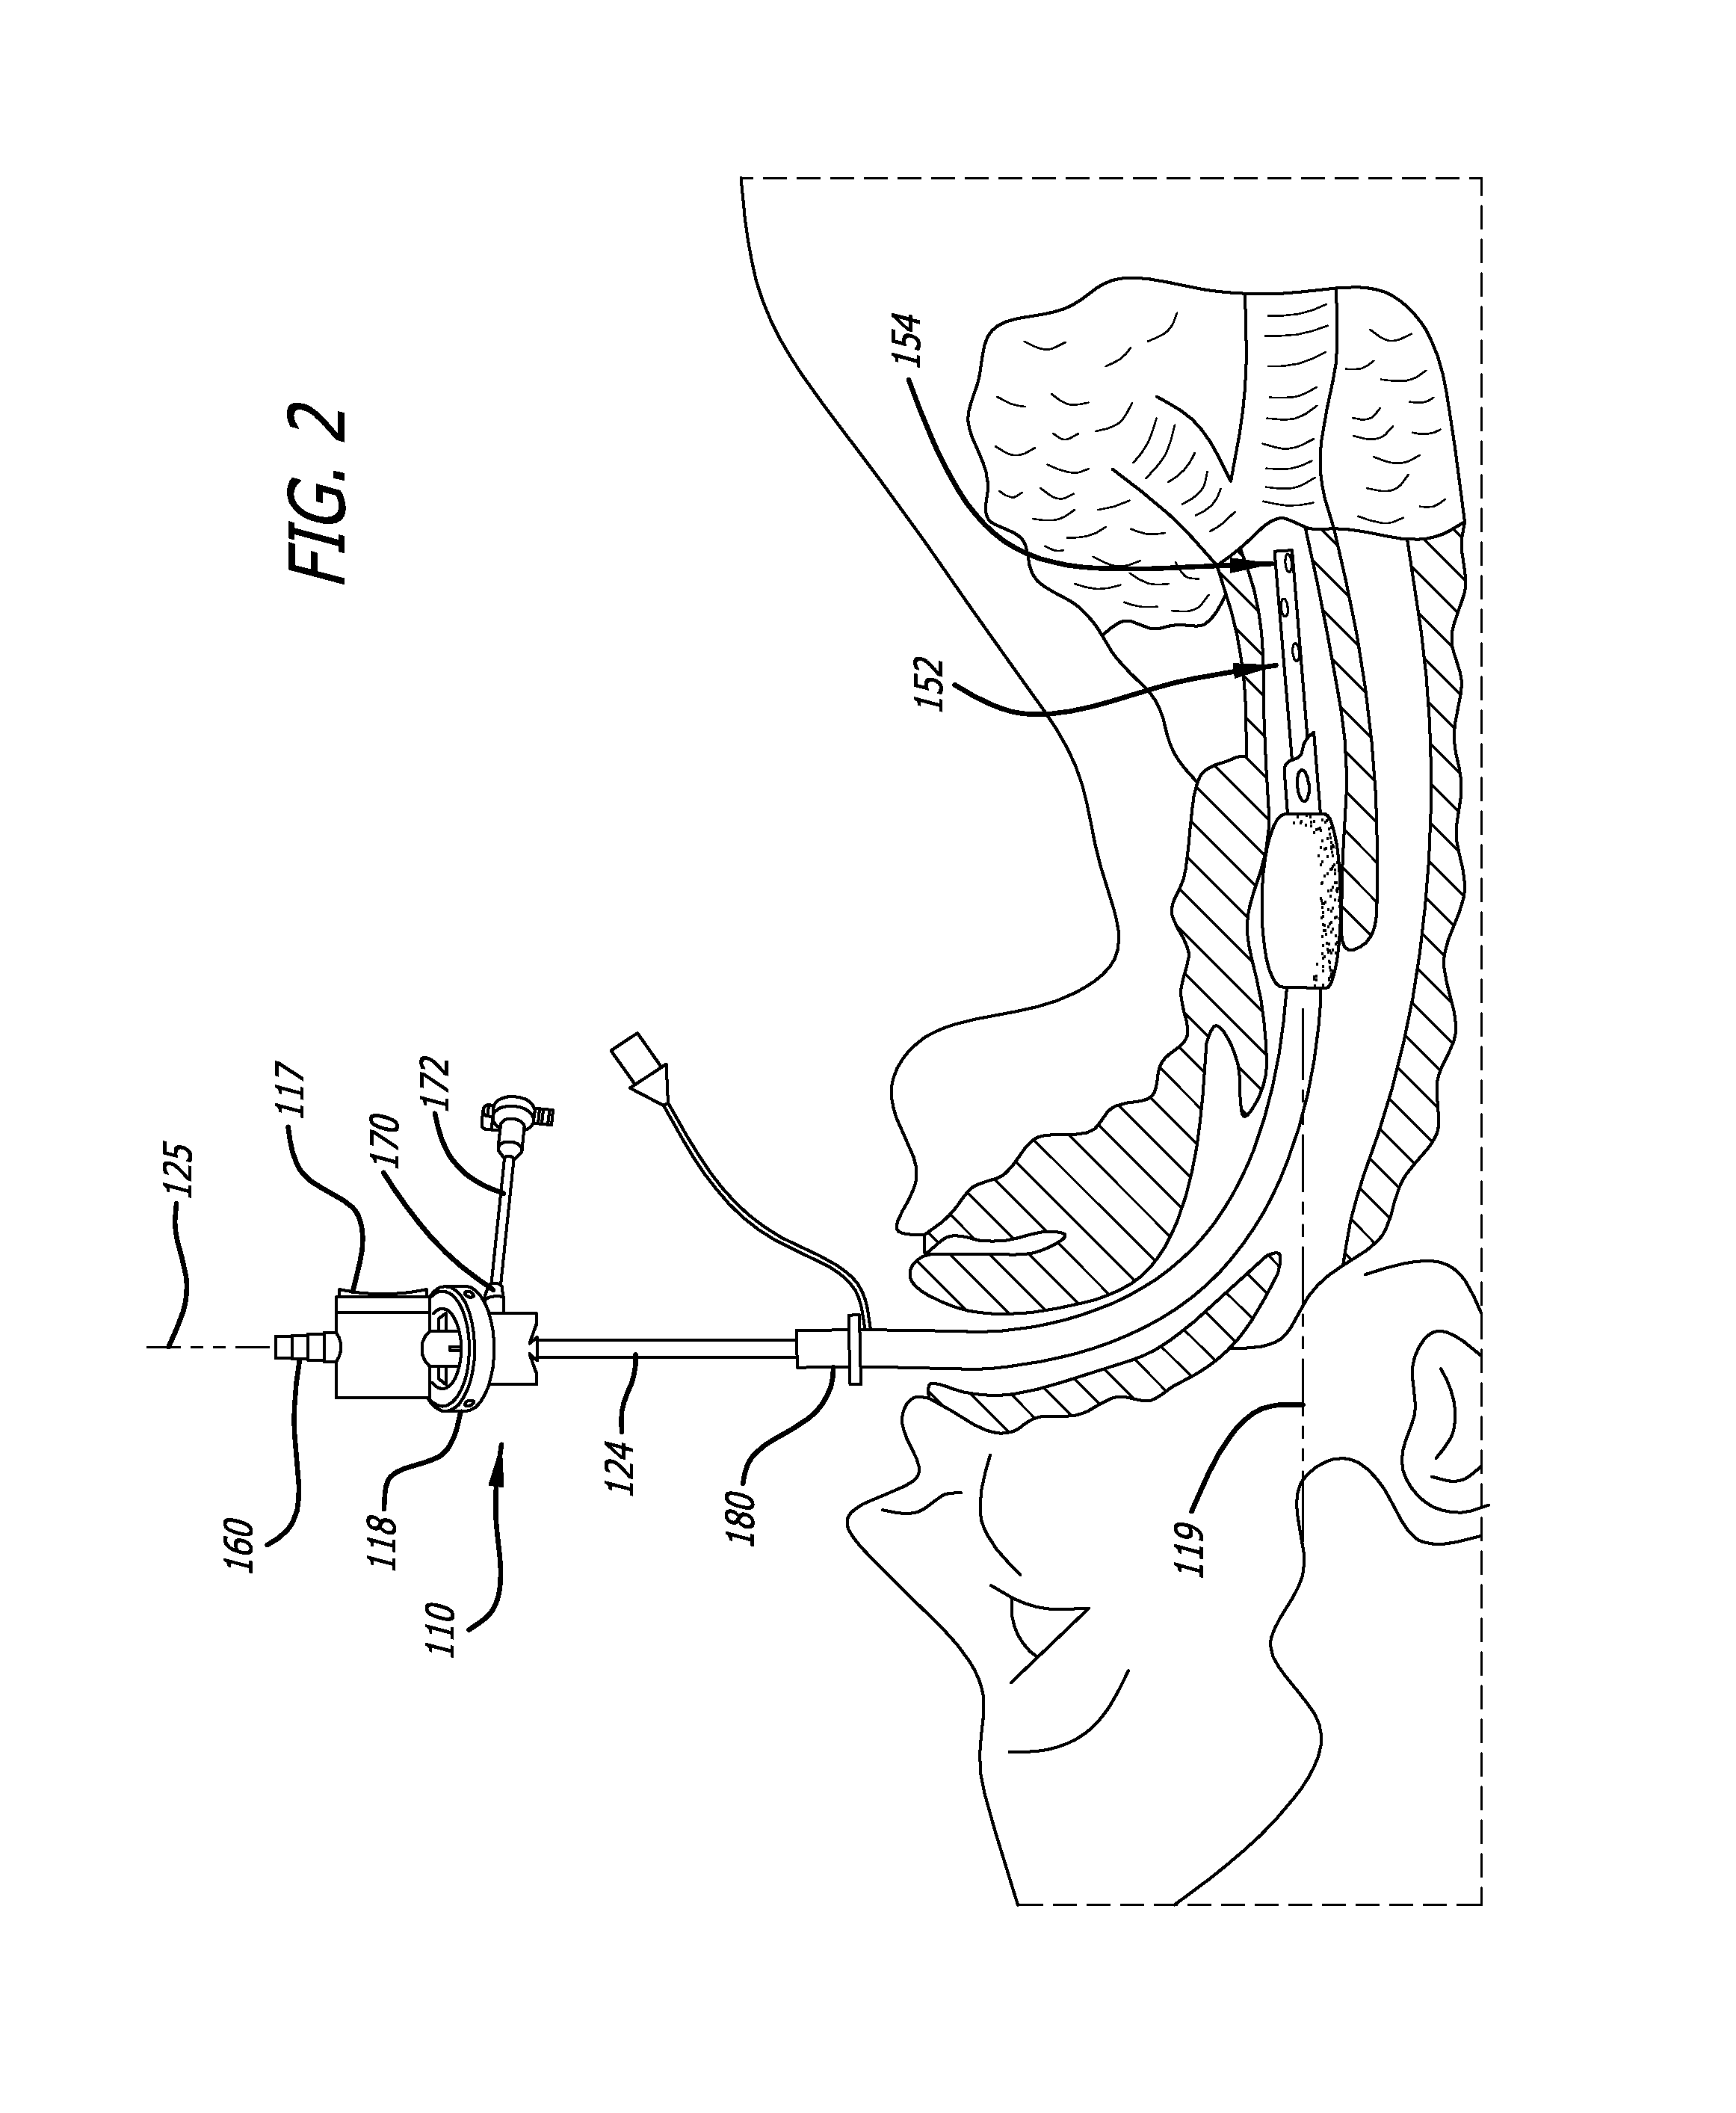 Bi-lateral endobronchial suctioning device and medical suctioning system for intubated patients